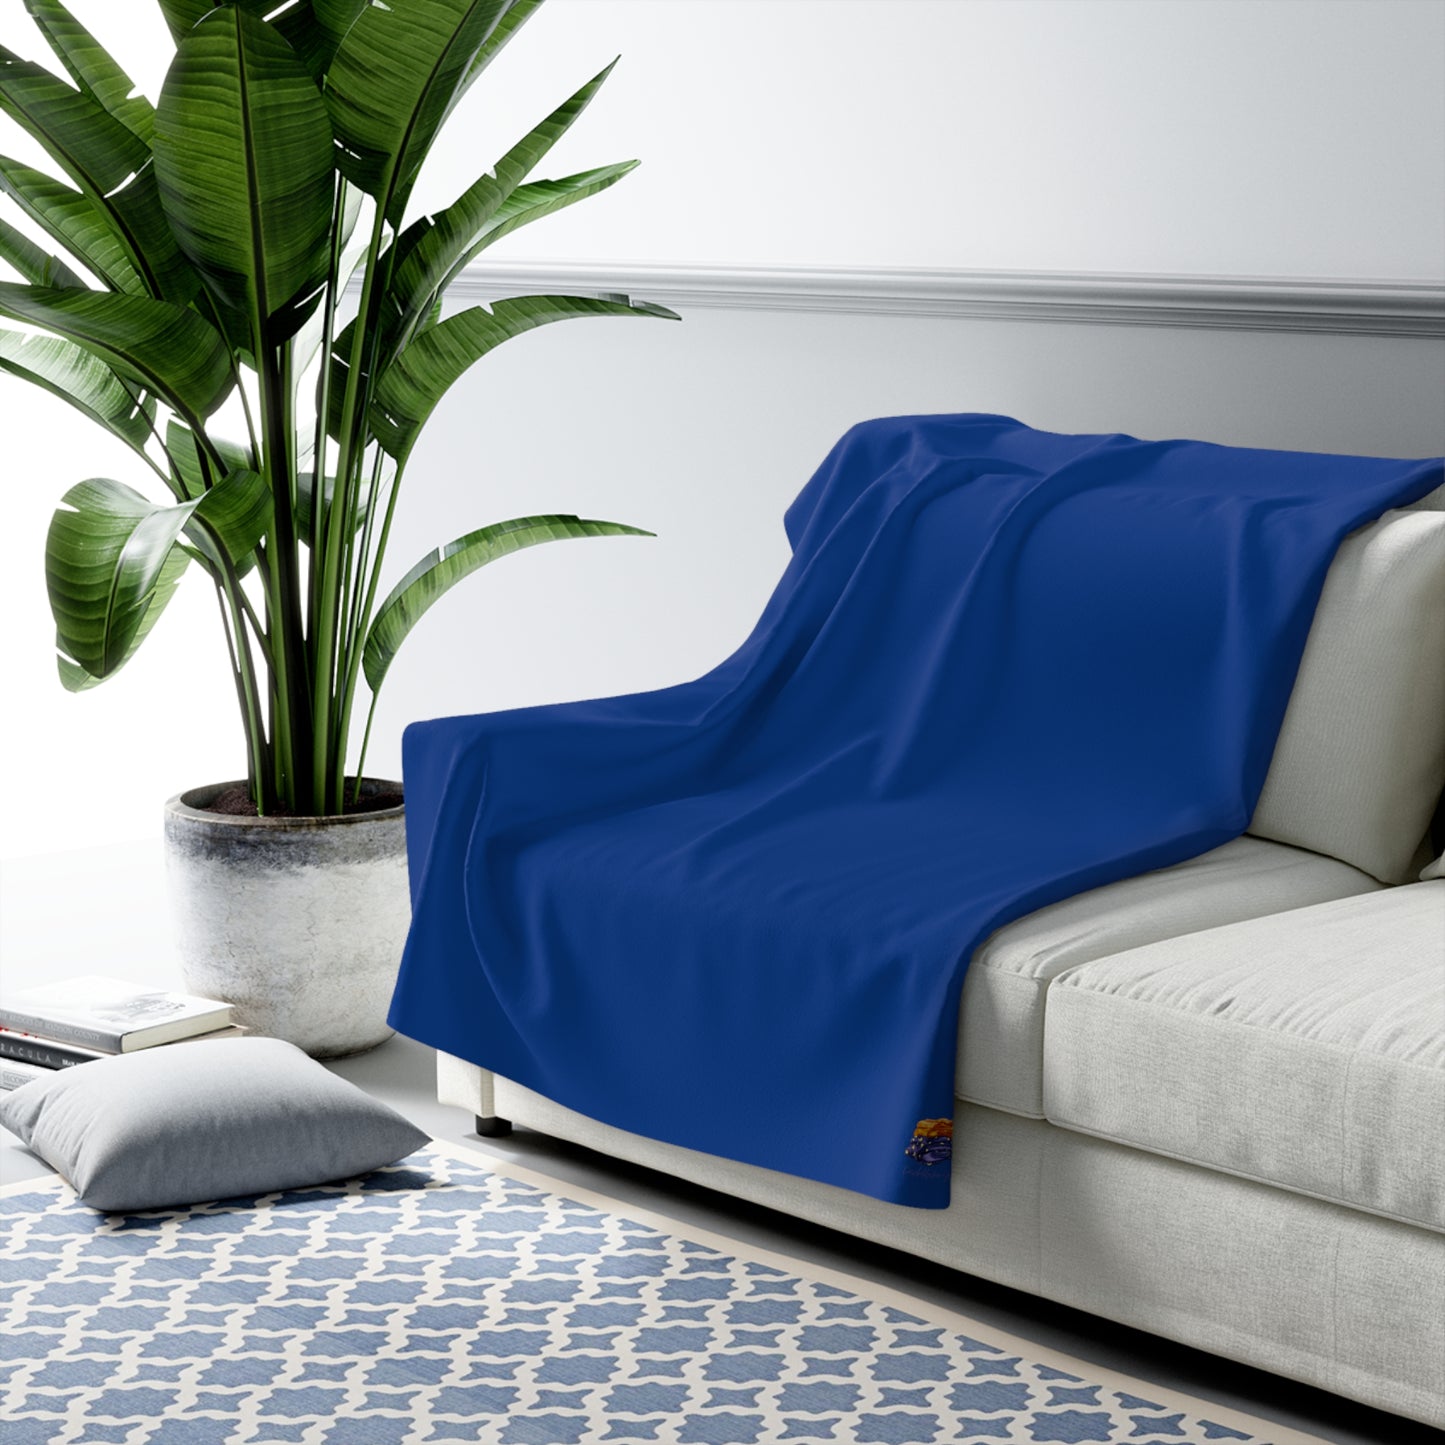 LUXURIOUS COZY BLANKET: THE EPITOME OF COMFORT AND WARMTH | Dark blue 